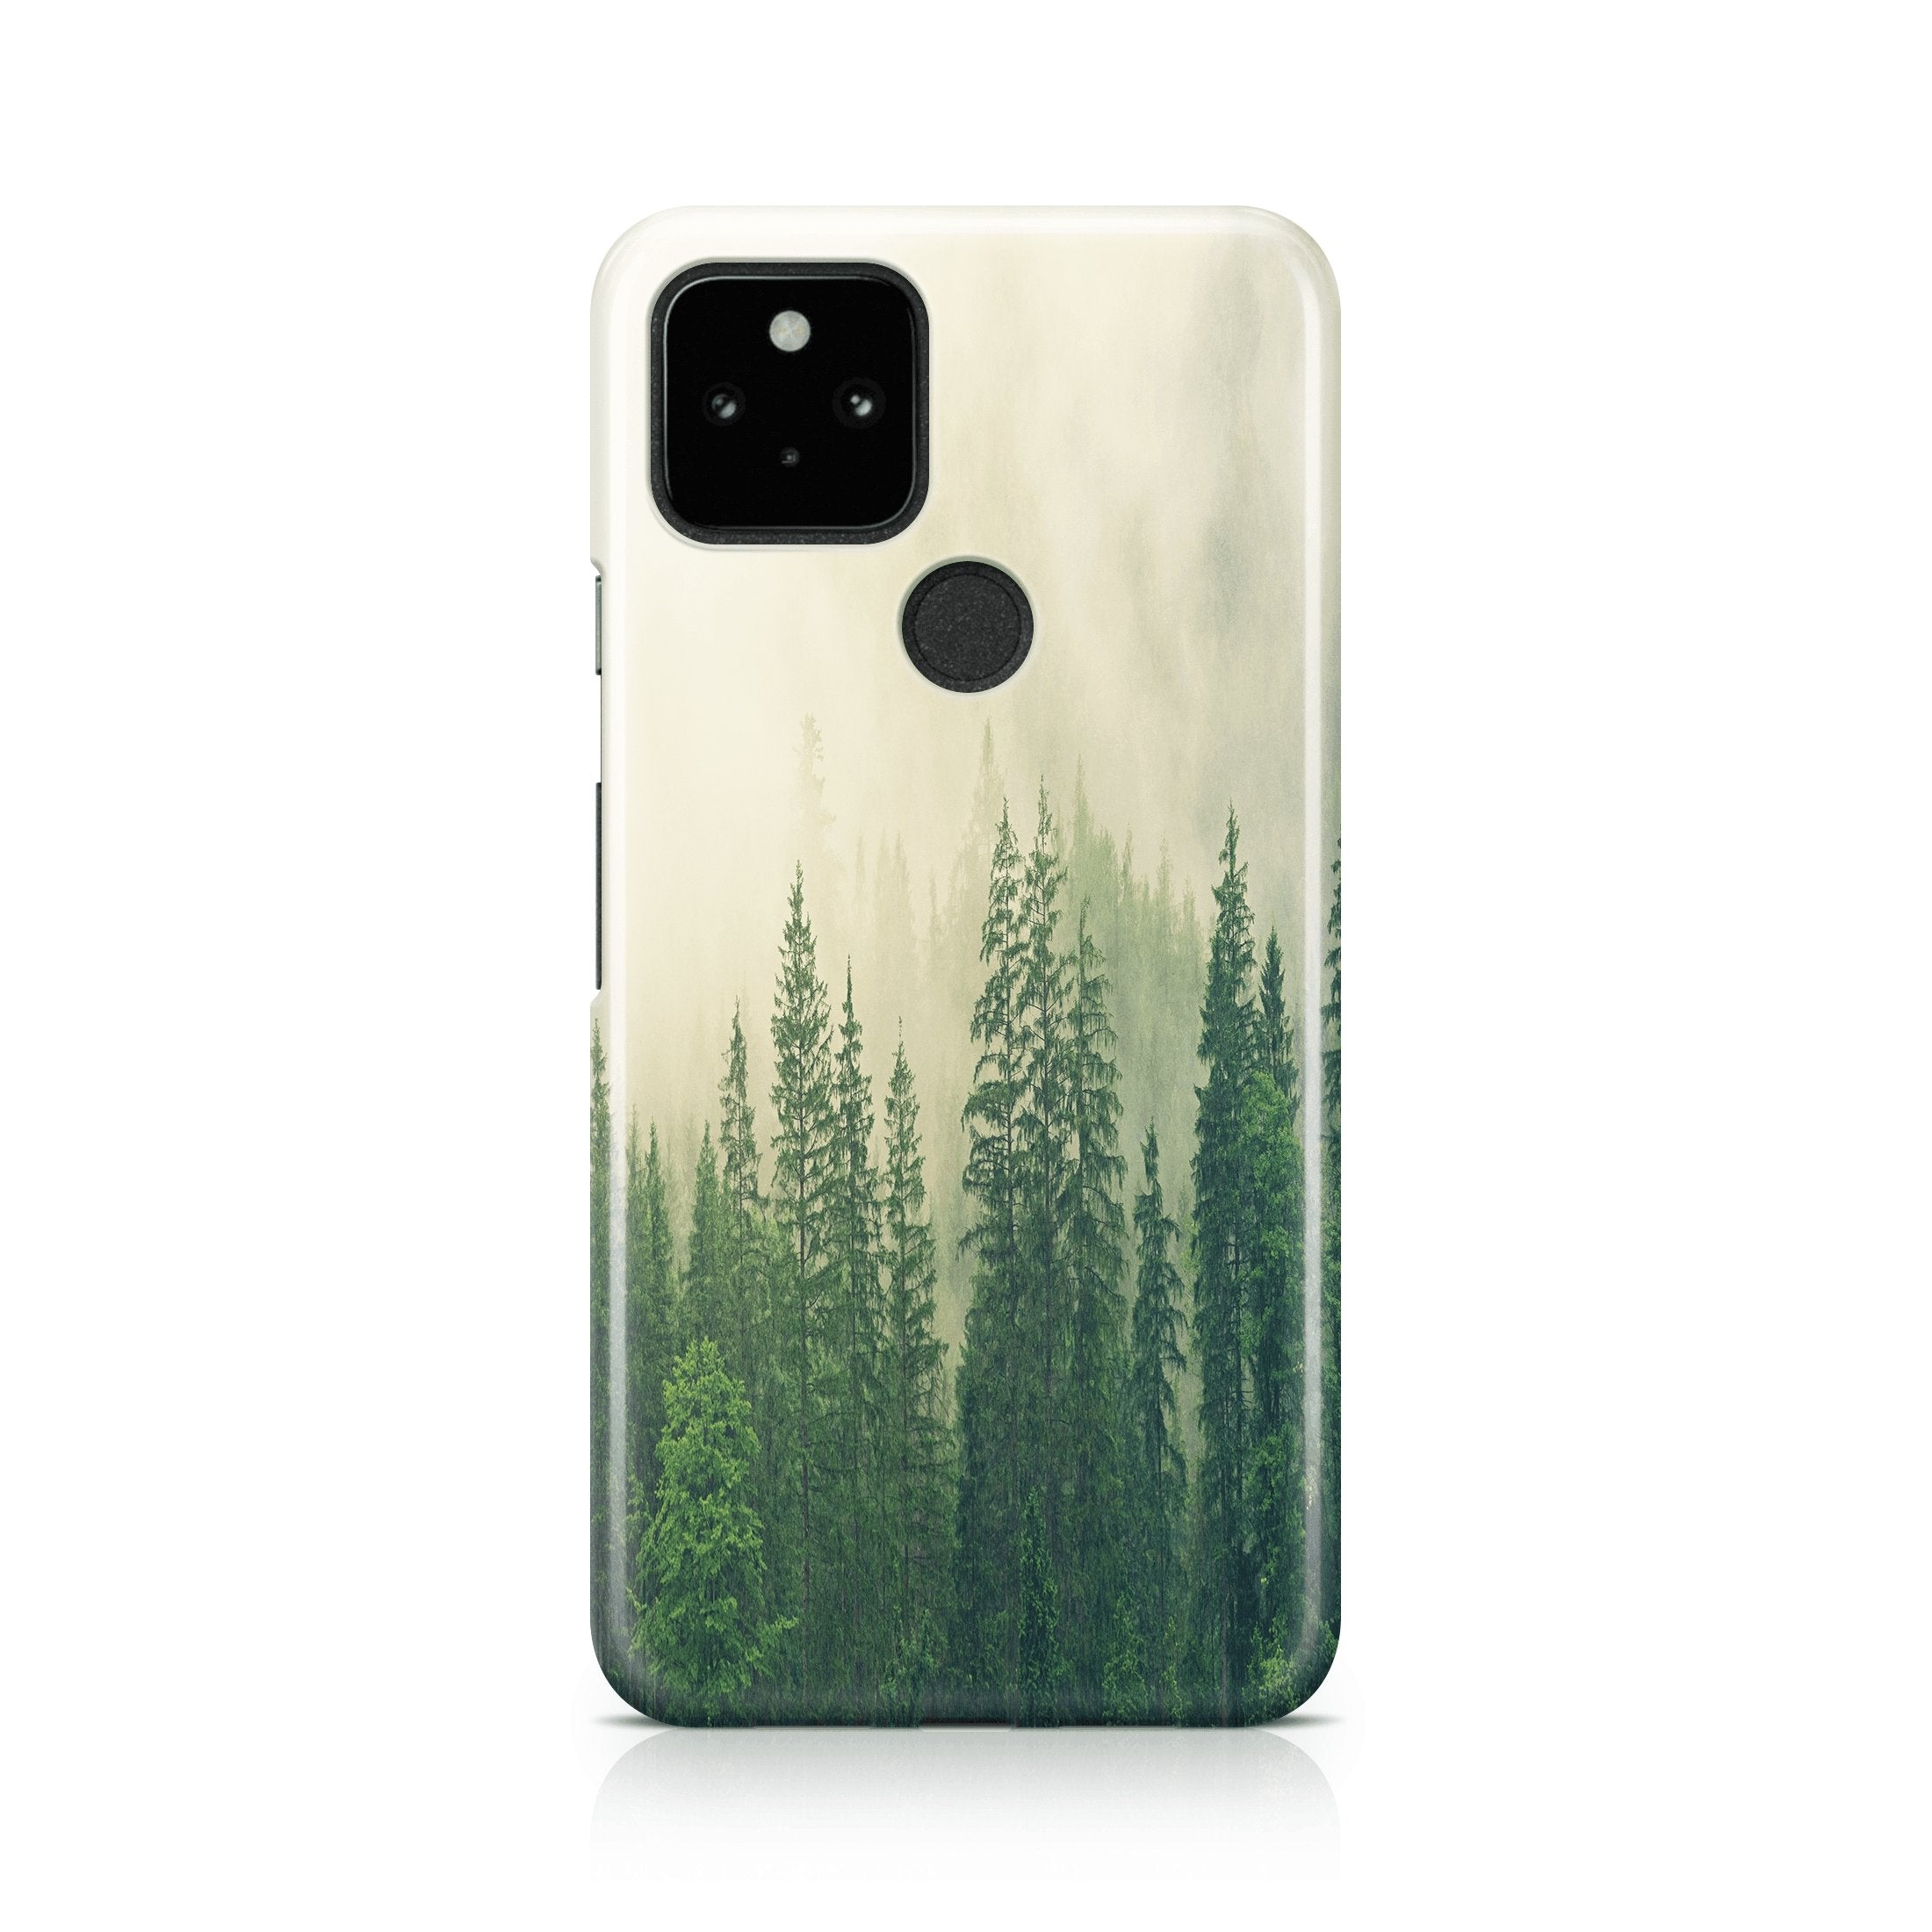 Fog Forest - Google phone case designs by CaseSwagger